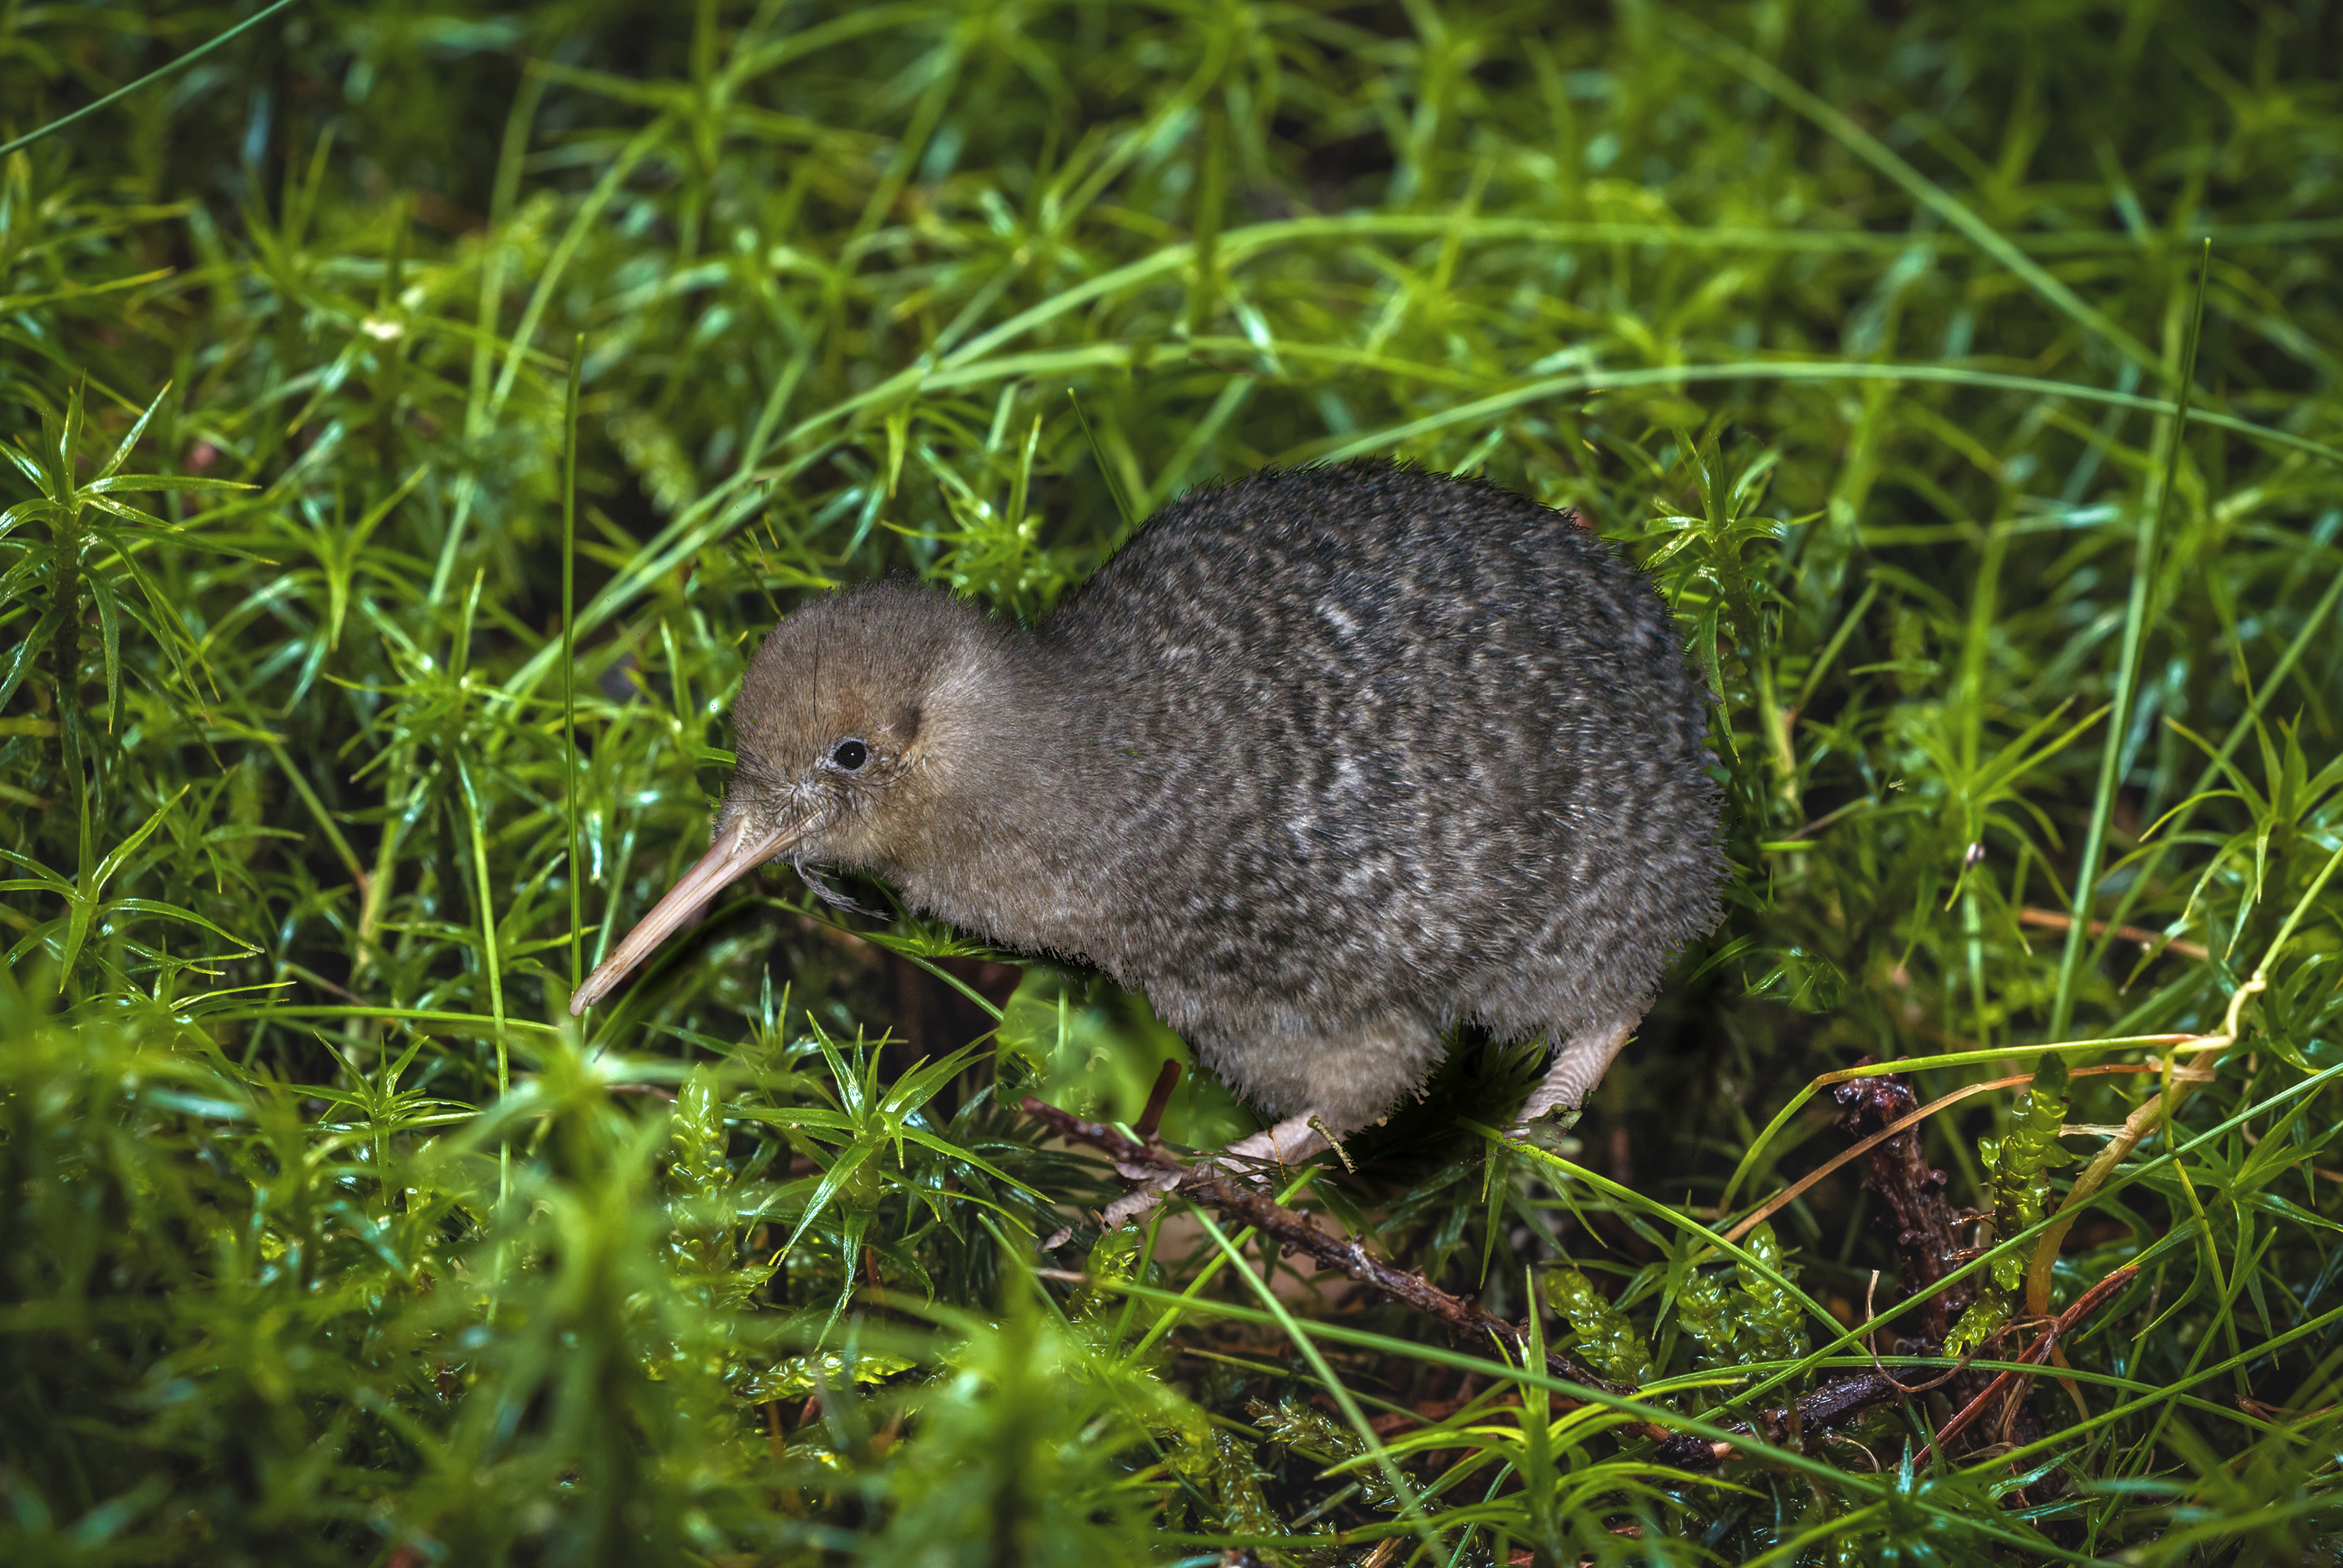 Little spotted kiwi in the grass